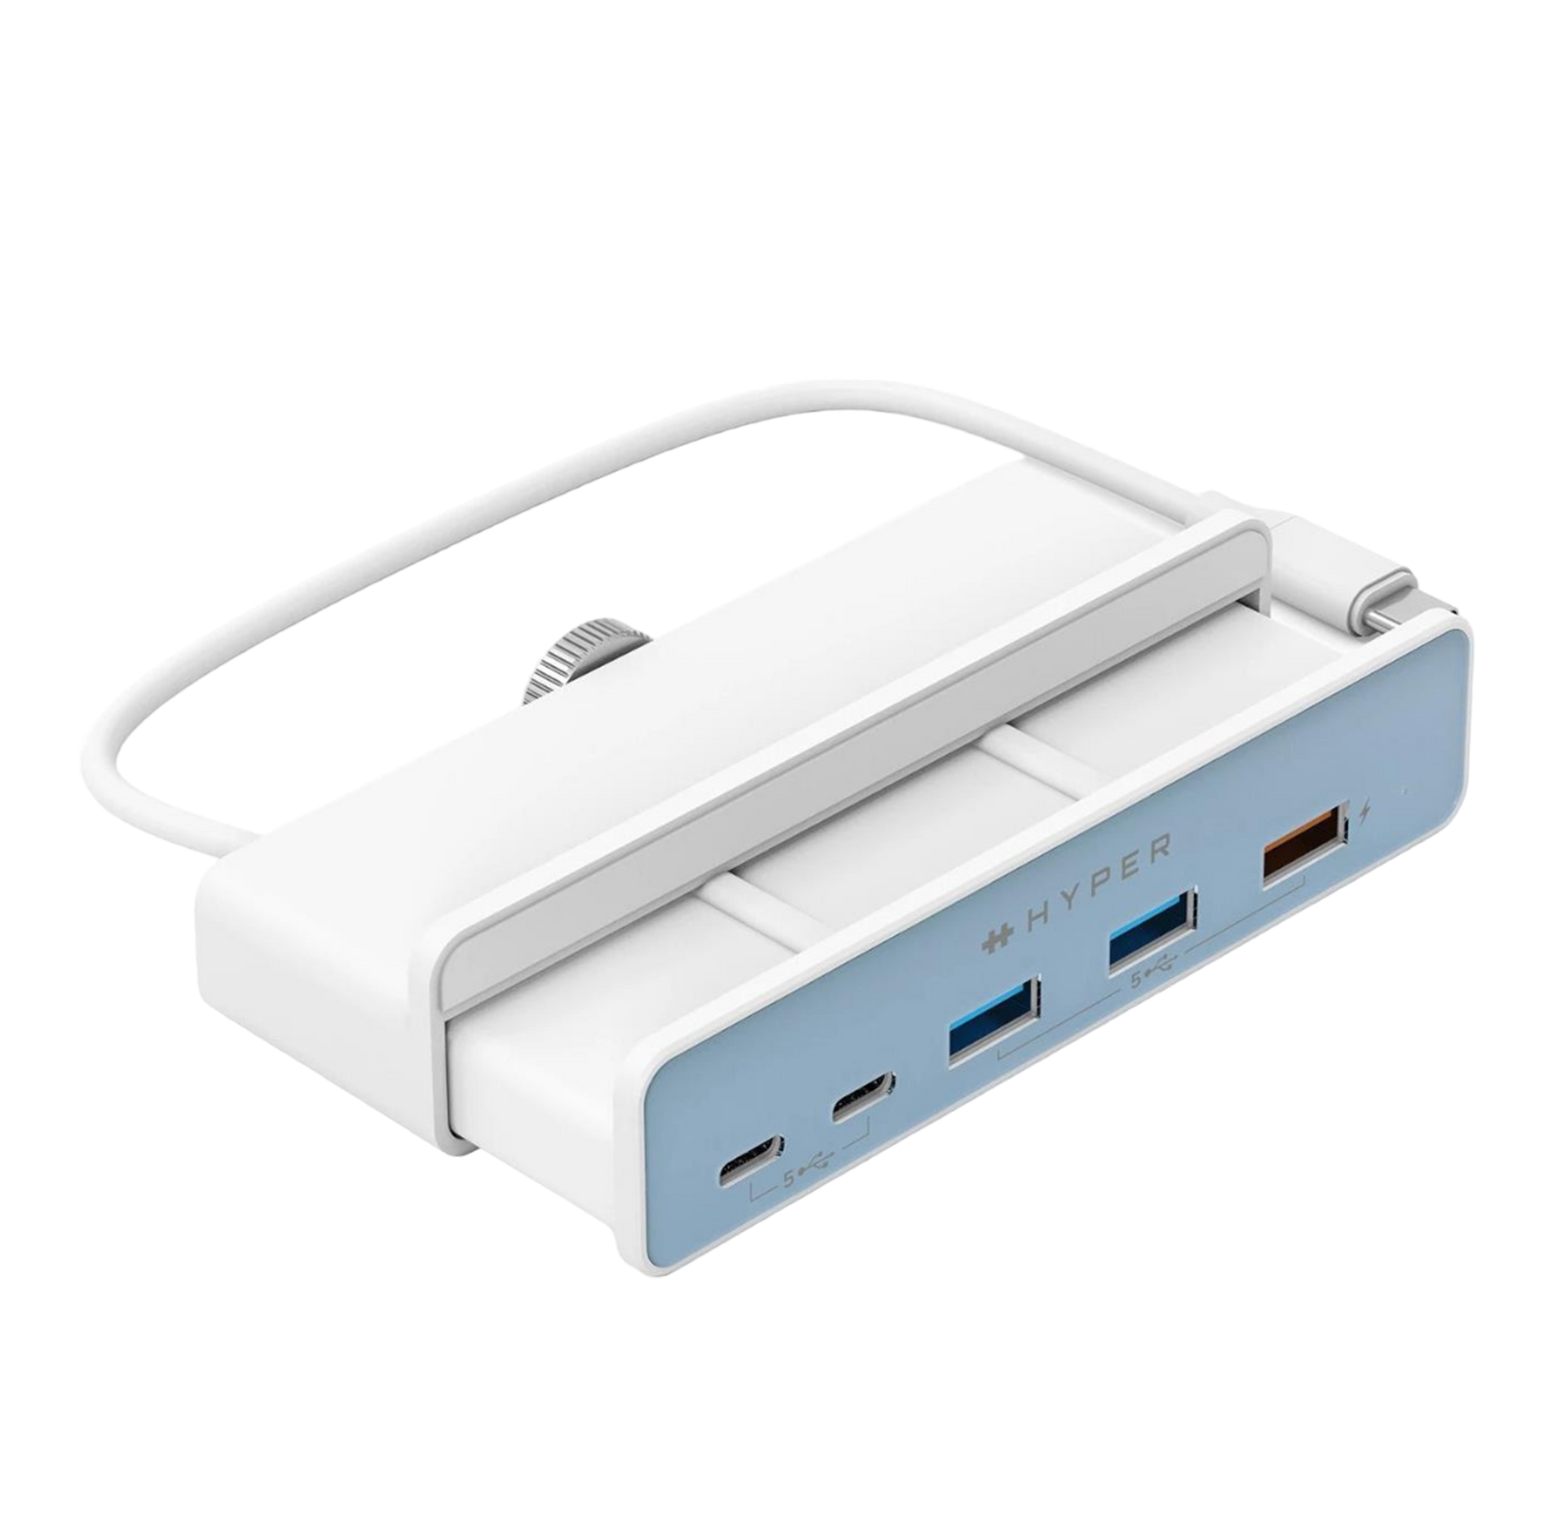 HyperDrive 5-in-1 USB-C Hub for iMac 24-inch - Discontinued